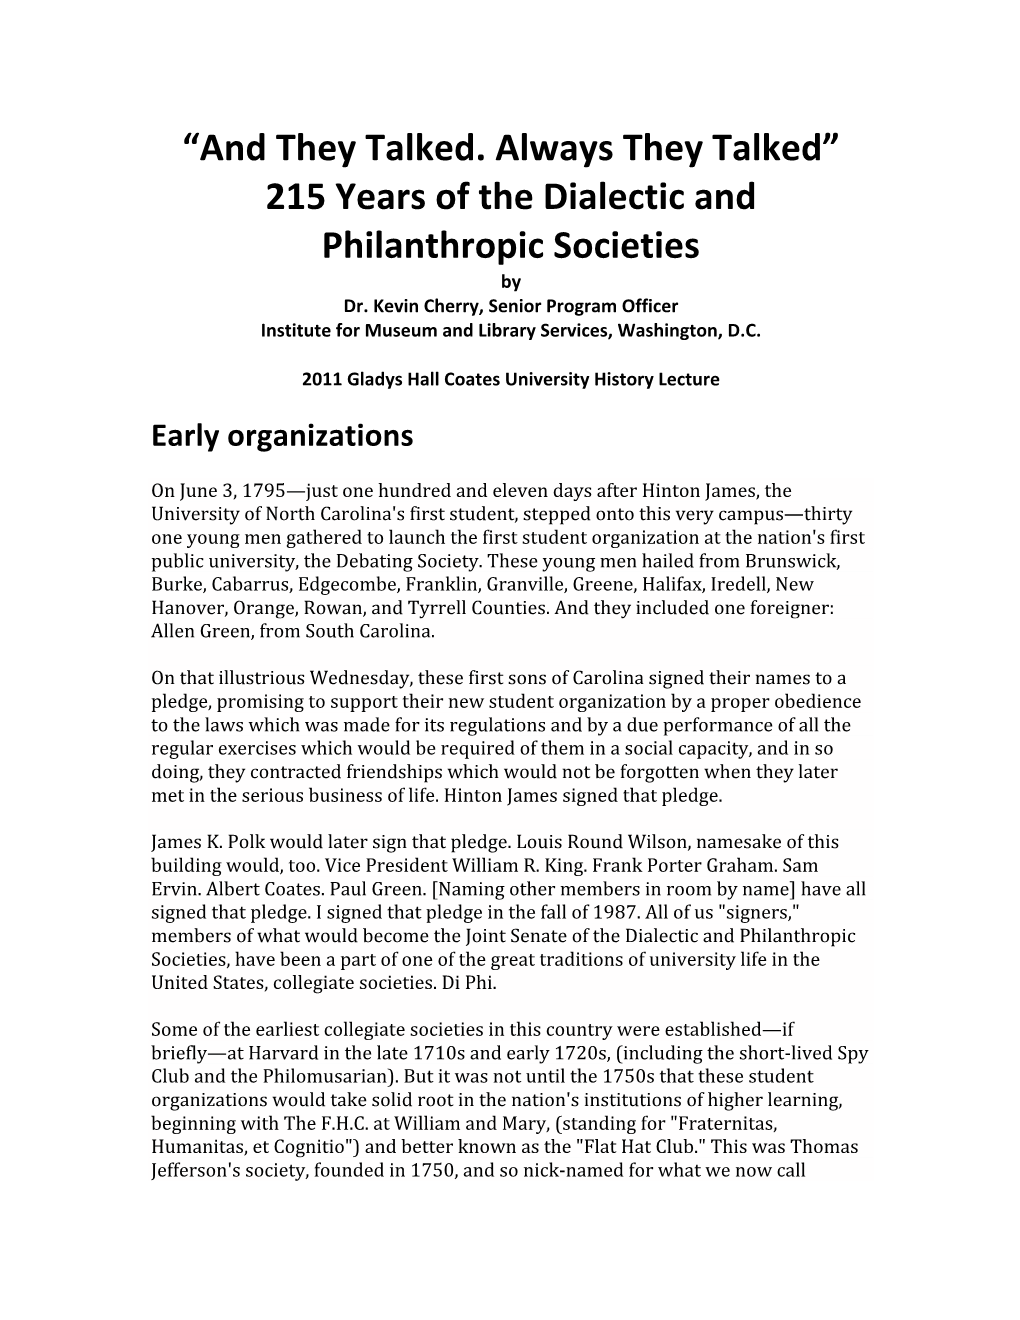 215 Years of the Dialectic and Philanthropic Societies by Dr